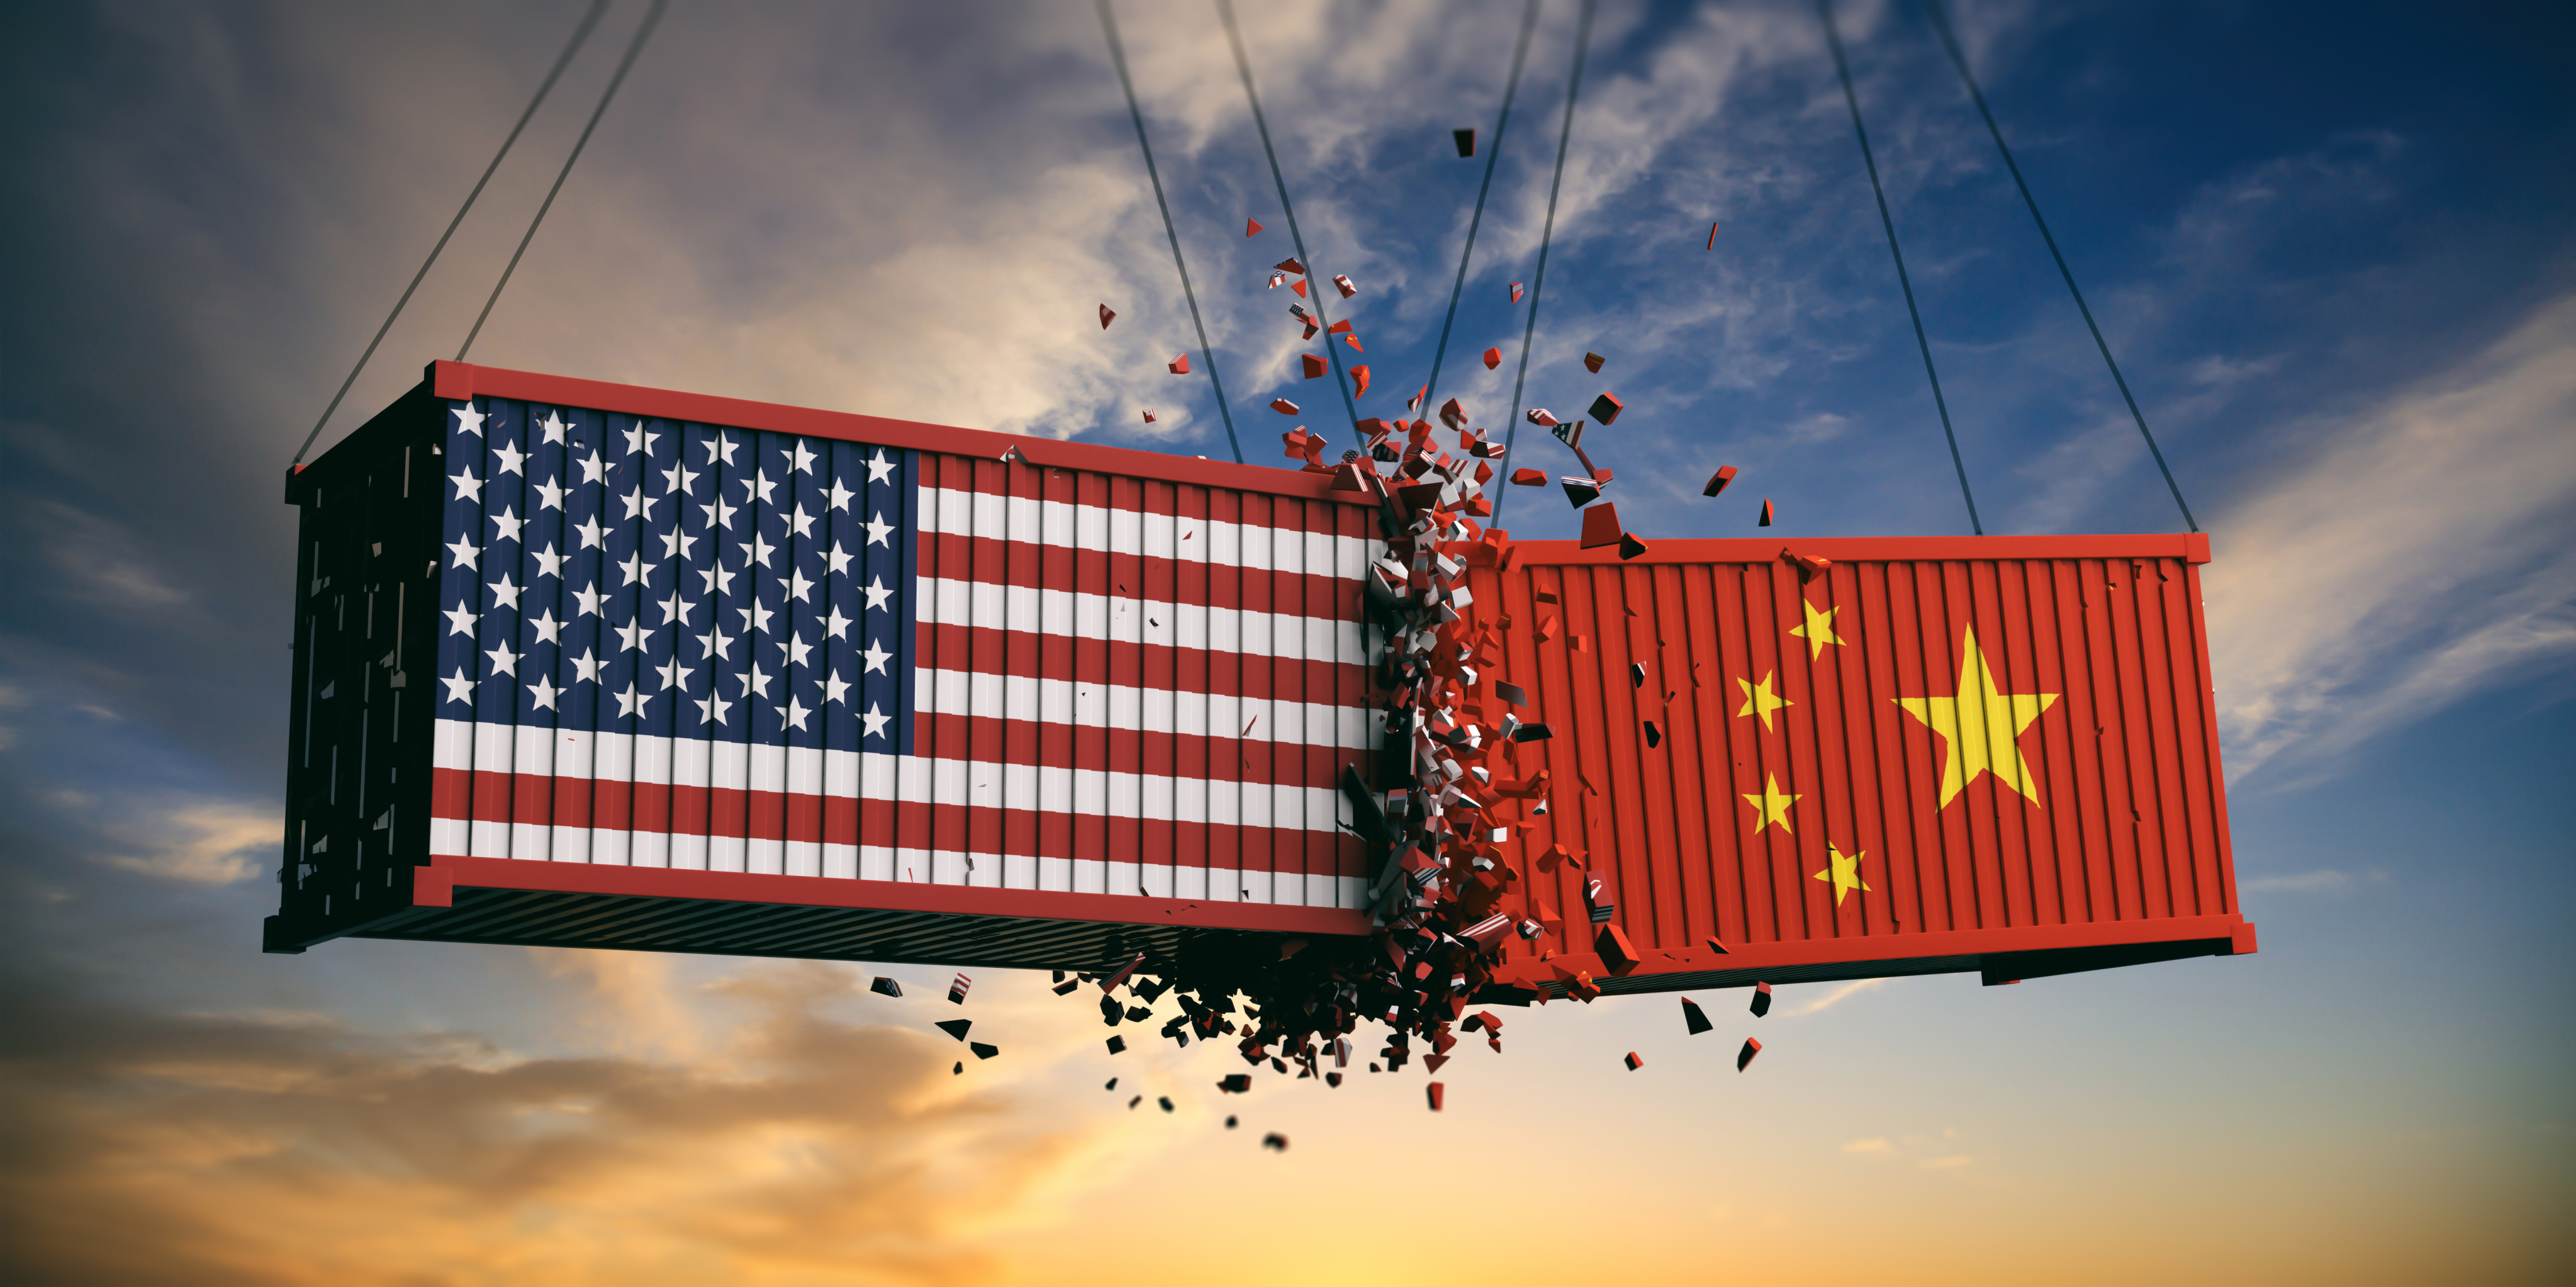 A study comprising years of surveys of Chinese citizens suggests that Beijing’s policy response to its trade war with Washington has been influenced by public opinion. Image: Shutterstock